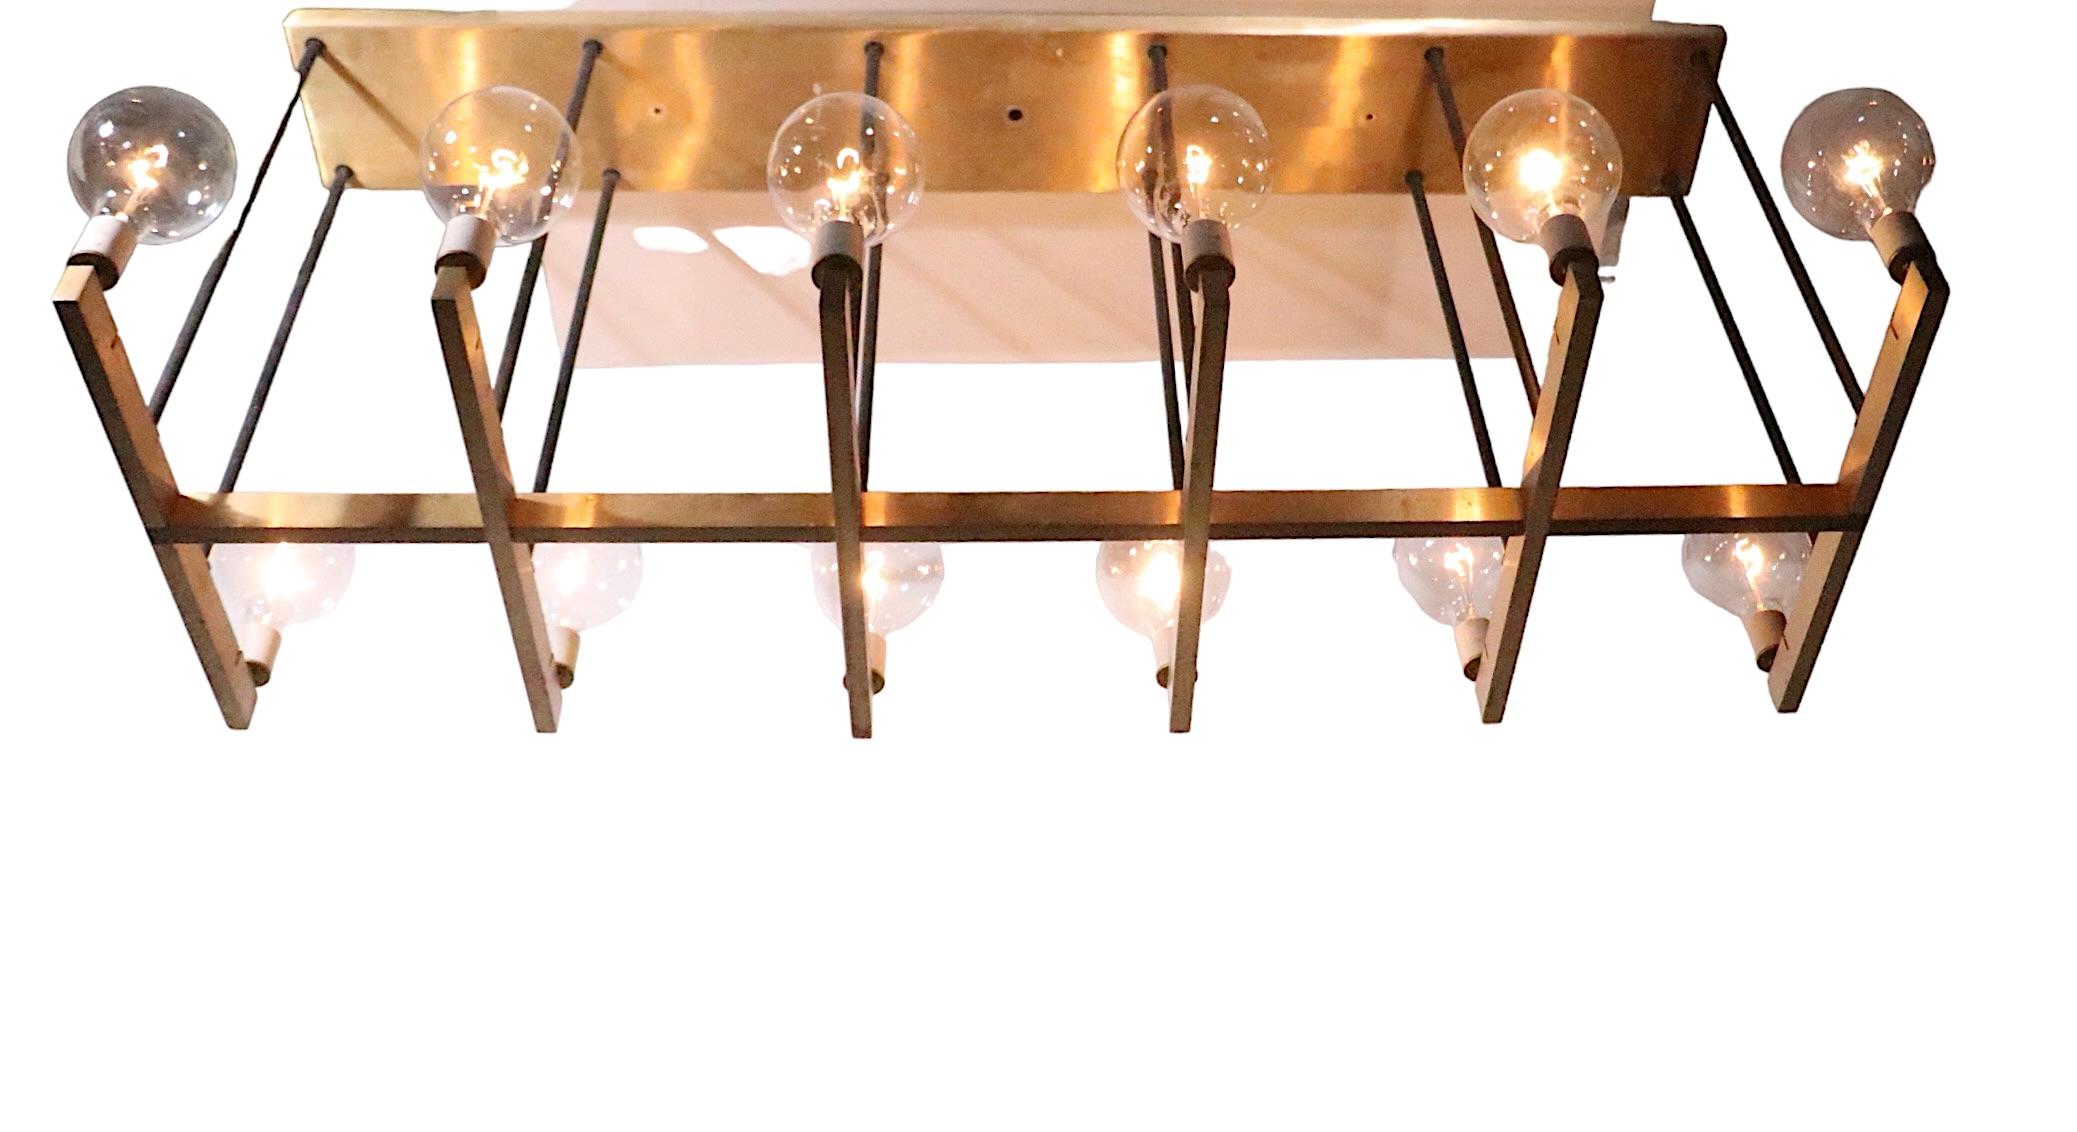 20th Century 12 Light Mid Century Architectural Scale Chandelier Fixture C 1950/1970s For Sale